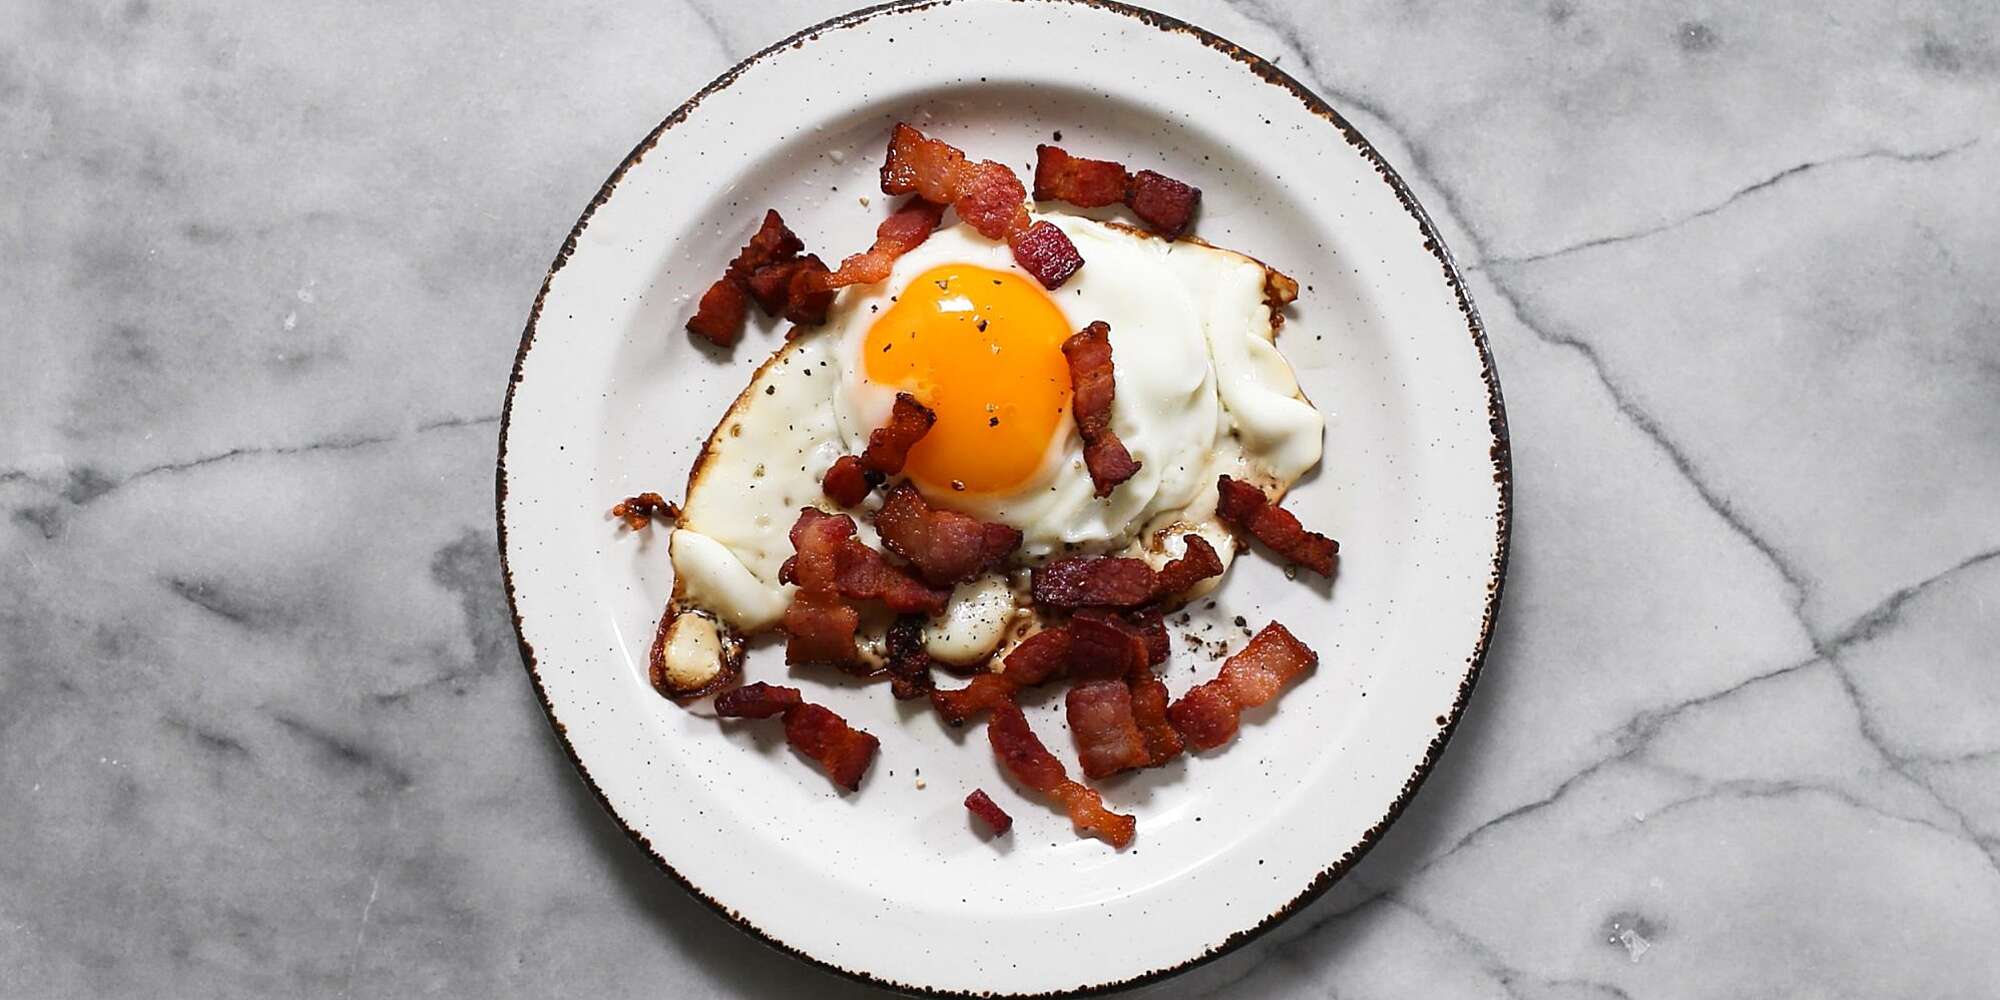 Delicious Fried Eggs: 4 Types for Every Palate